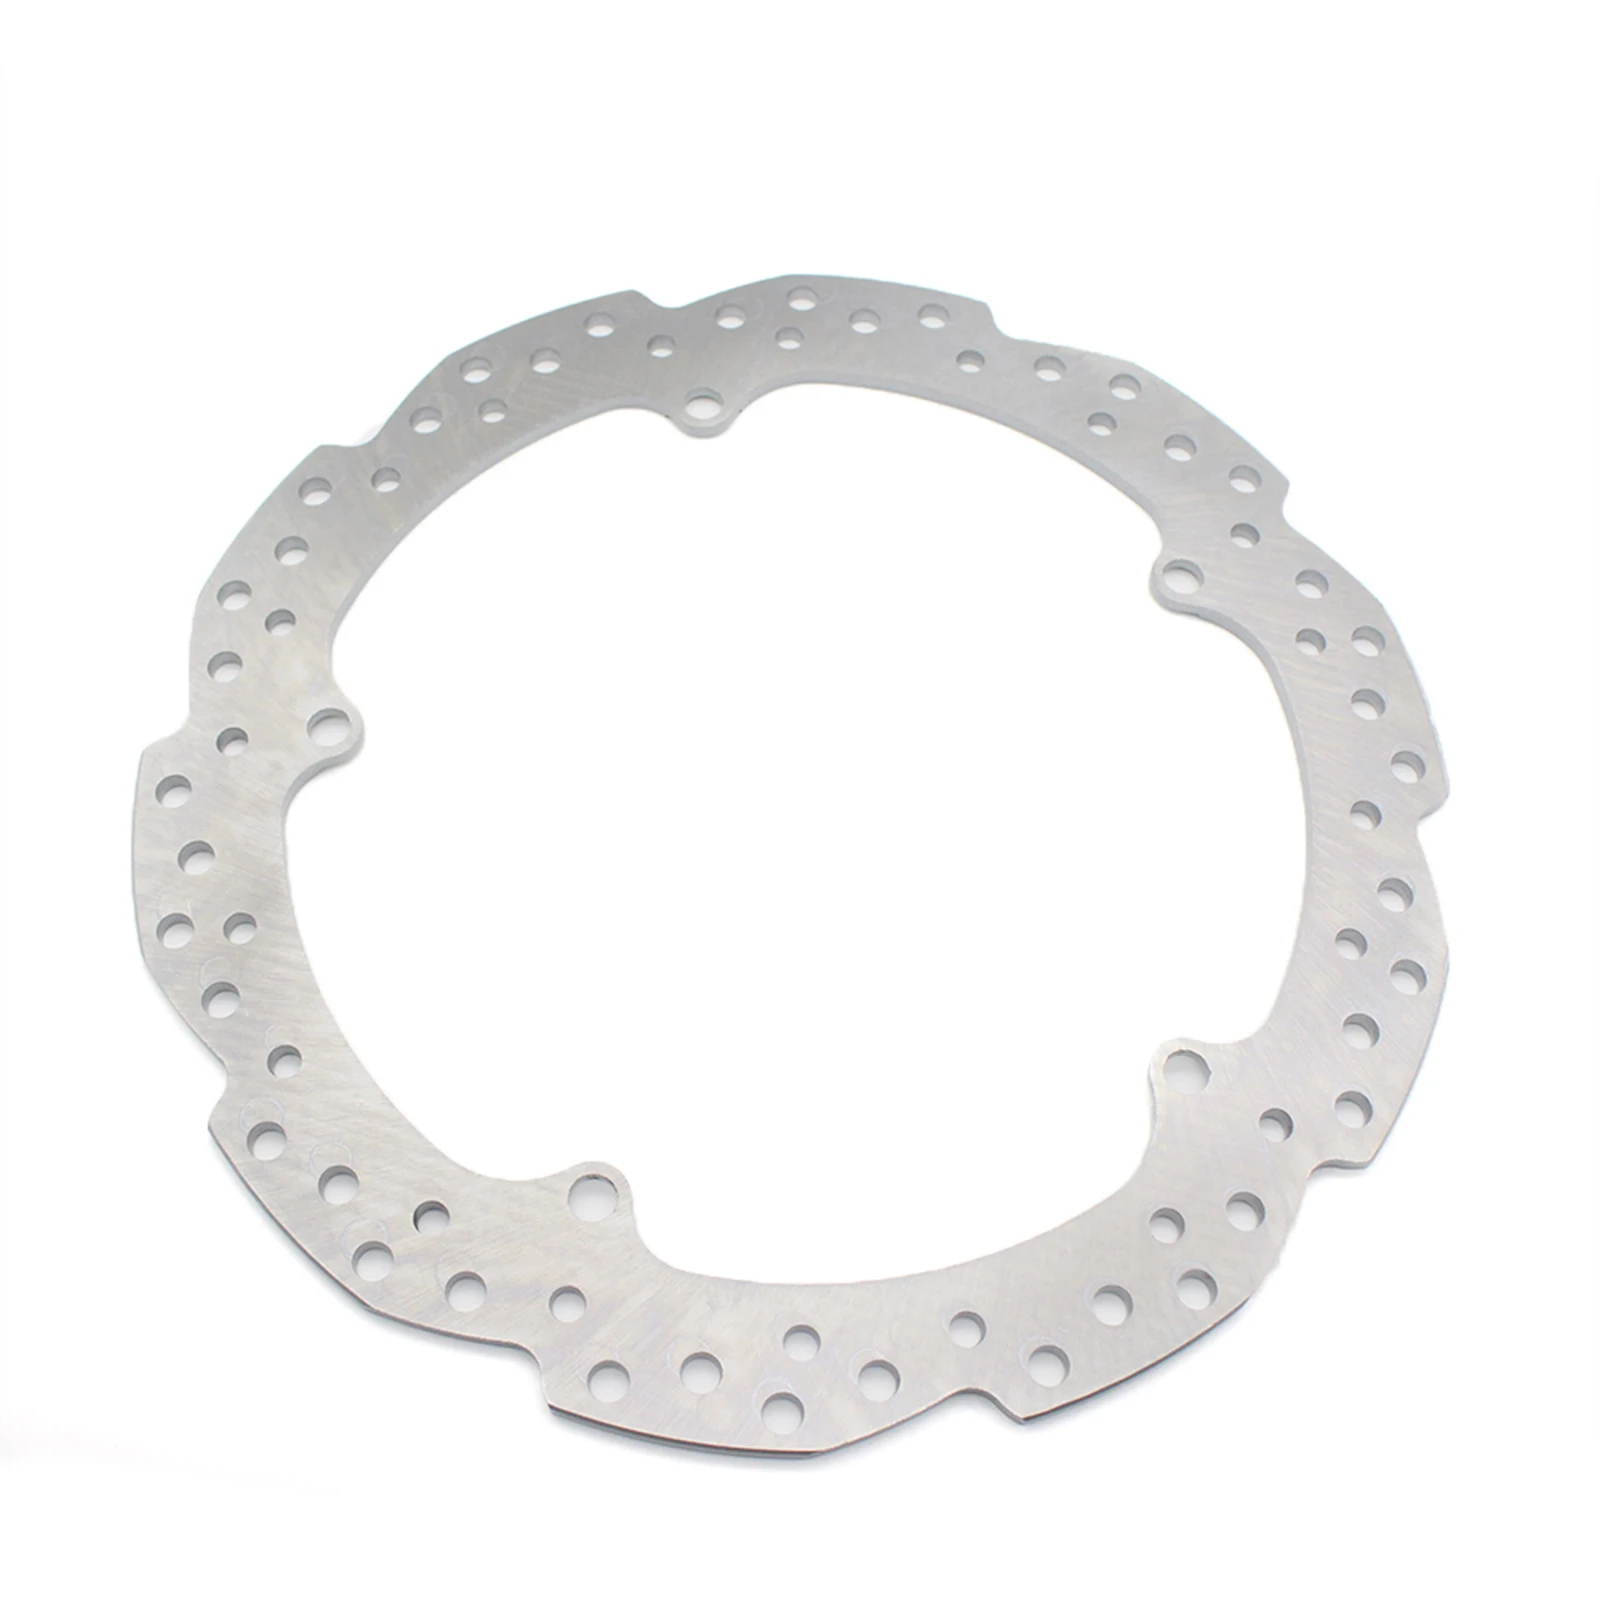 Front Brake Disc Rotor ,High Quality ,Durable Stainless 20mm Wheel Brake Rotors for  /S 12-2013 Motorcycle Moulding